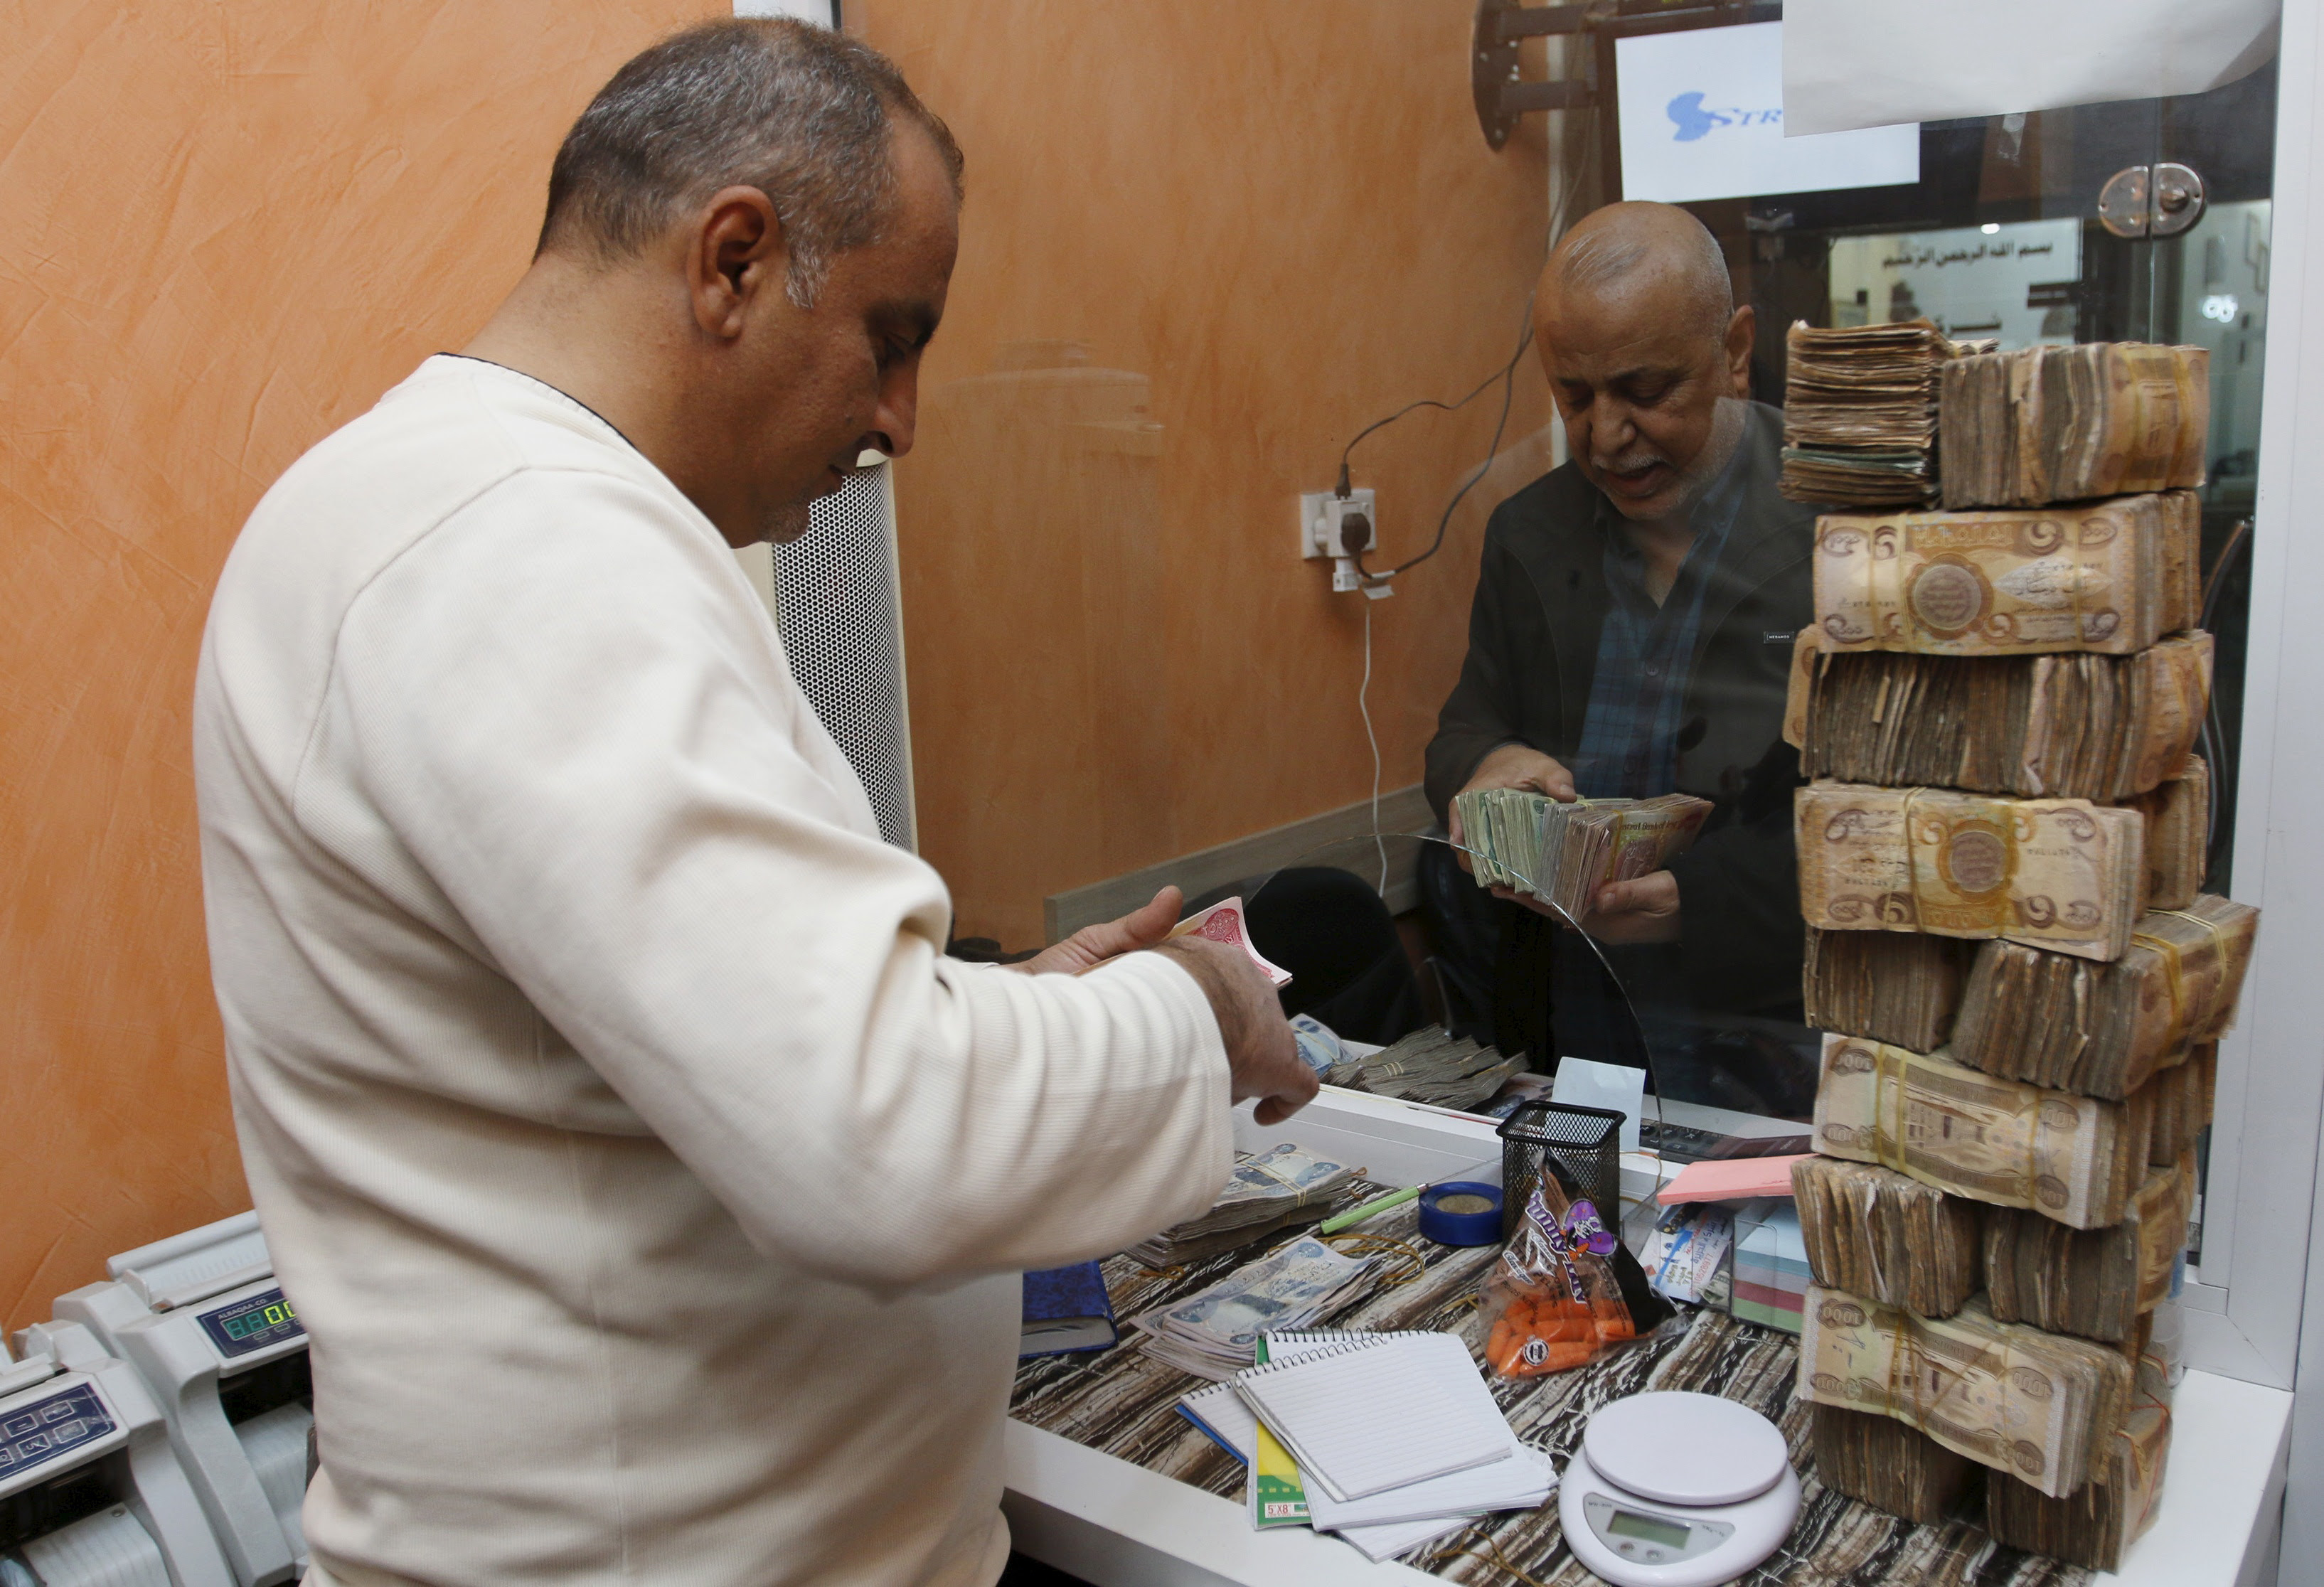 The Iraqi dinar exchange rate crisis against the dollar continues. Archive